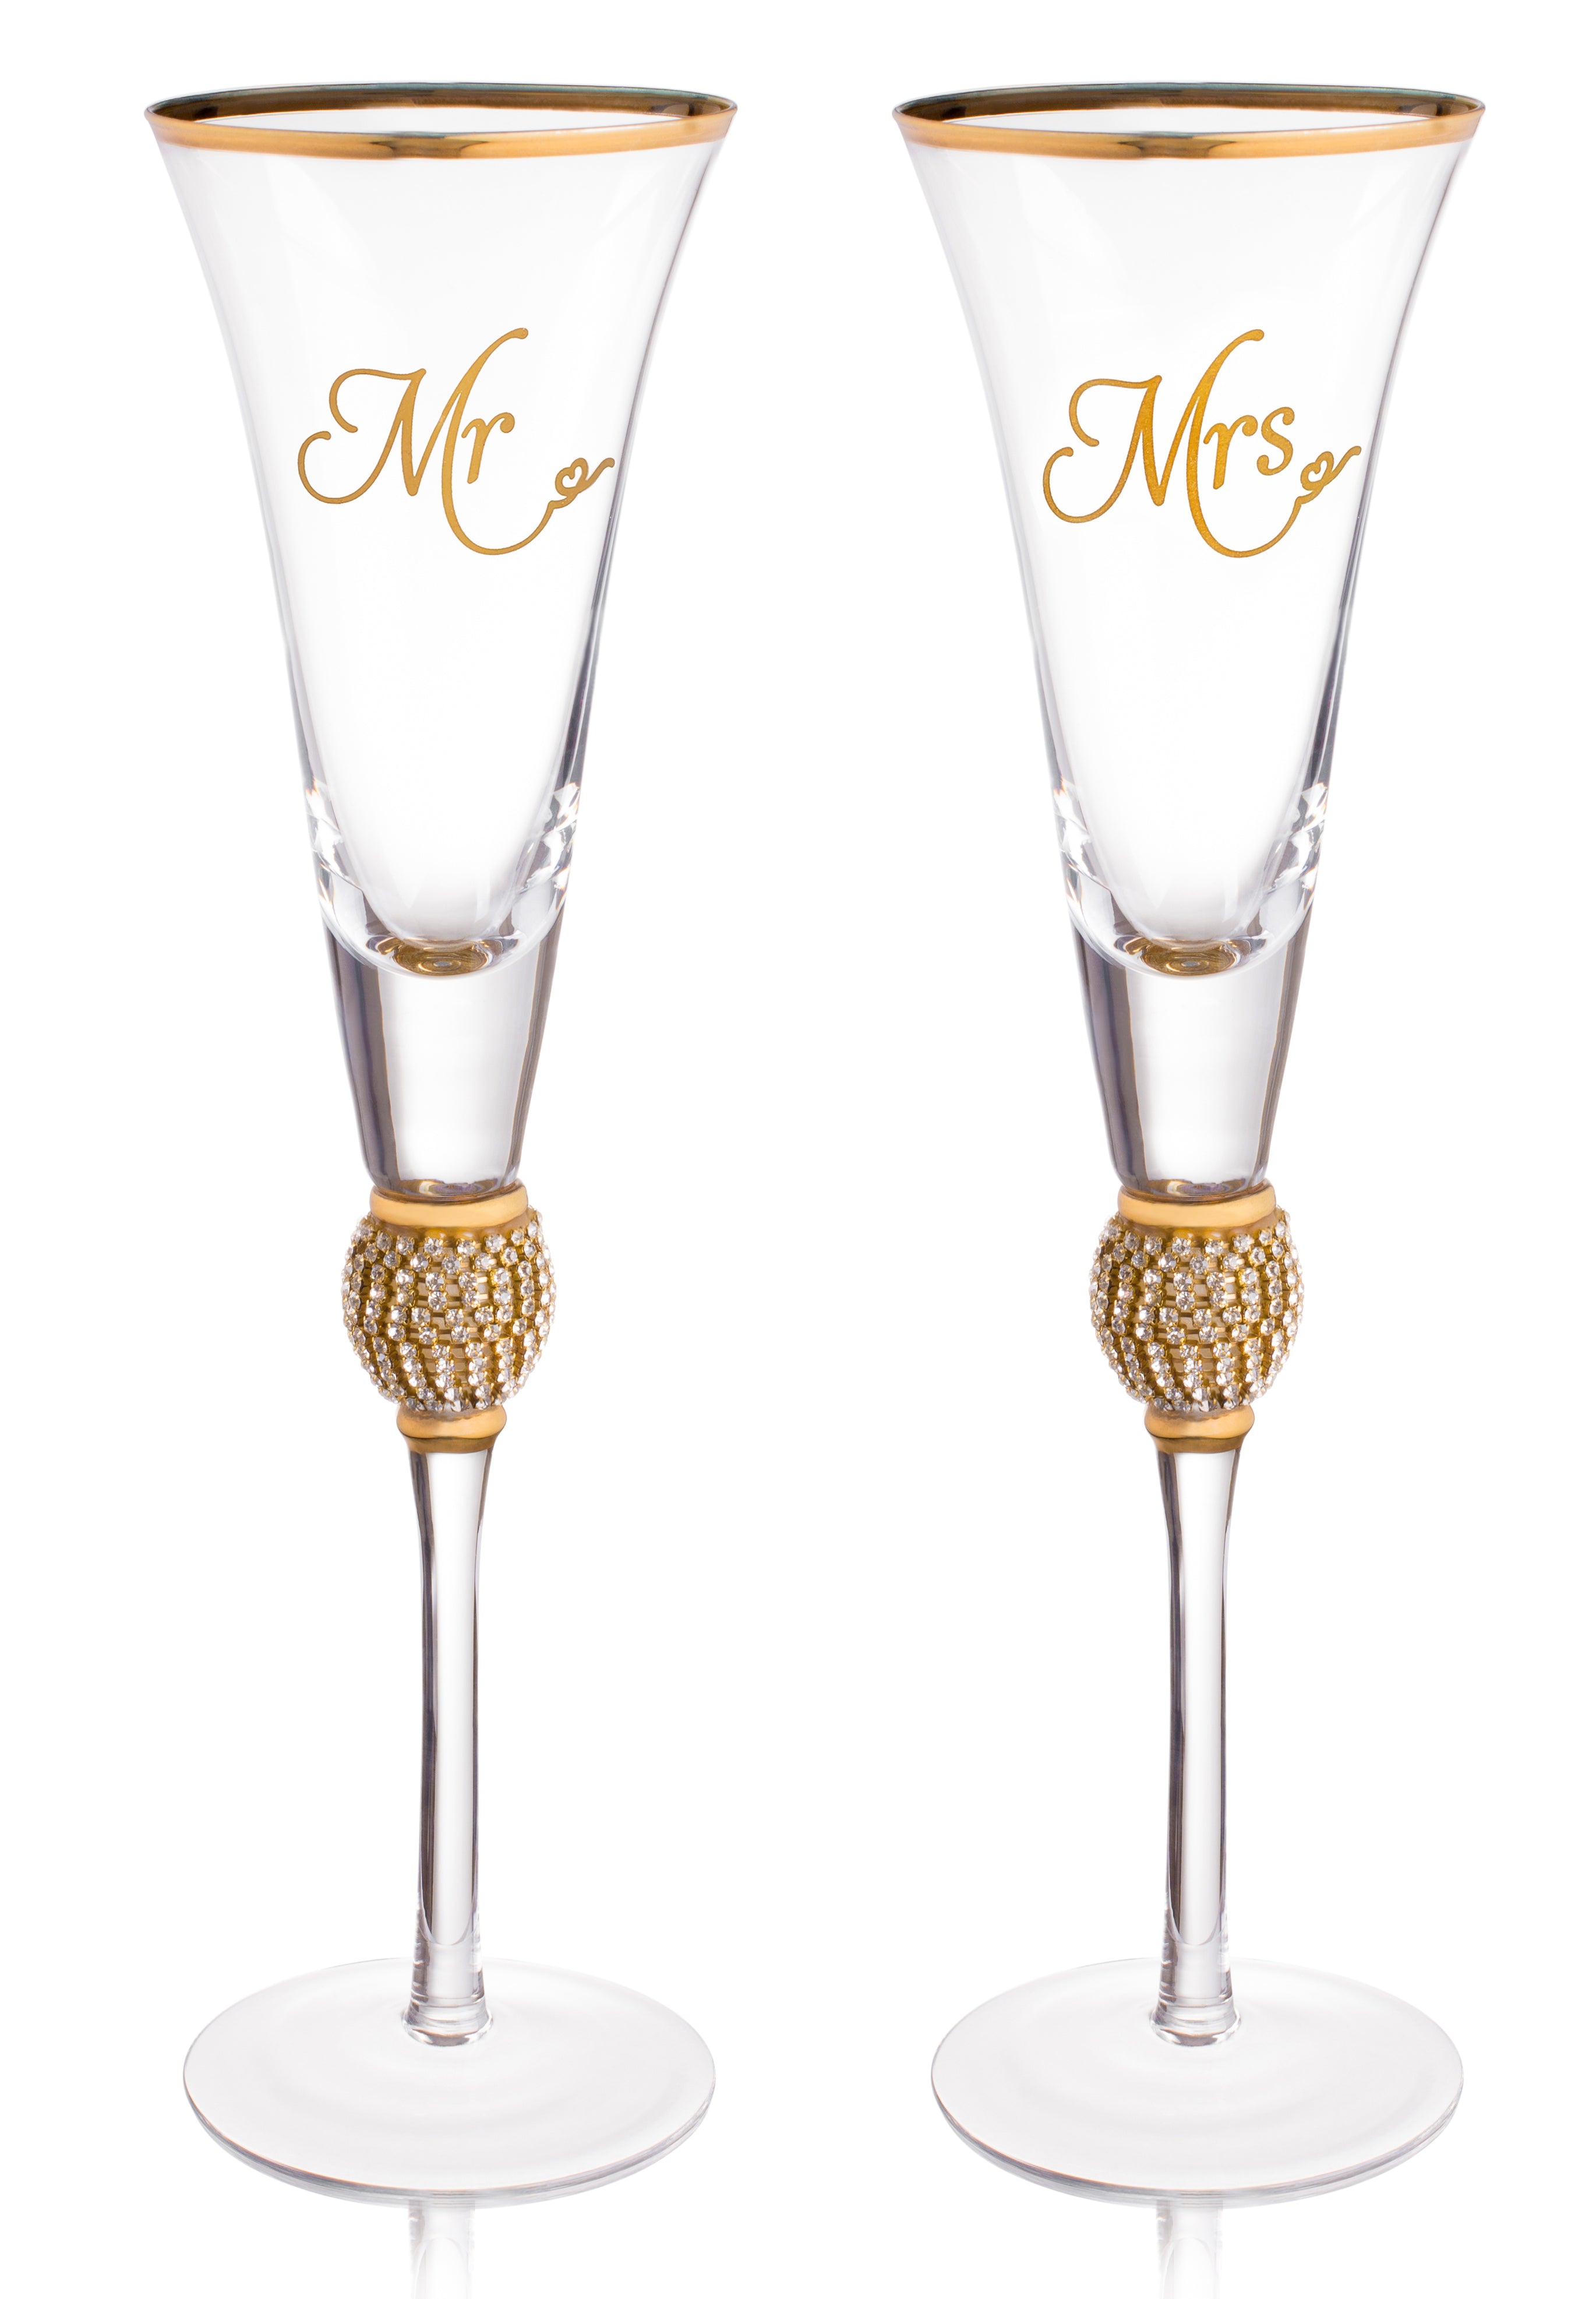 DUJUST Crystal Glass Wedding Champagne Flutes, Mr & Mrs Champagne Glasses  with Handcrafted Gold Rim …See more DUJUST Crystal Glass Wedding Champagne